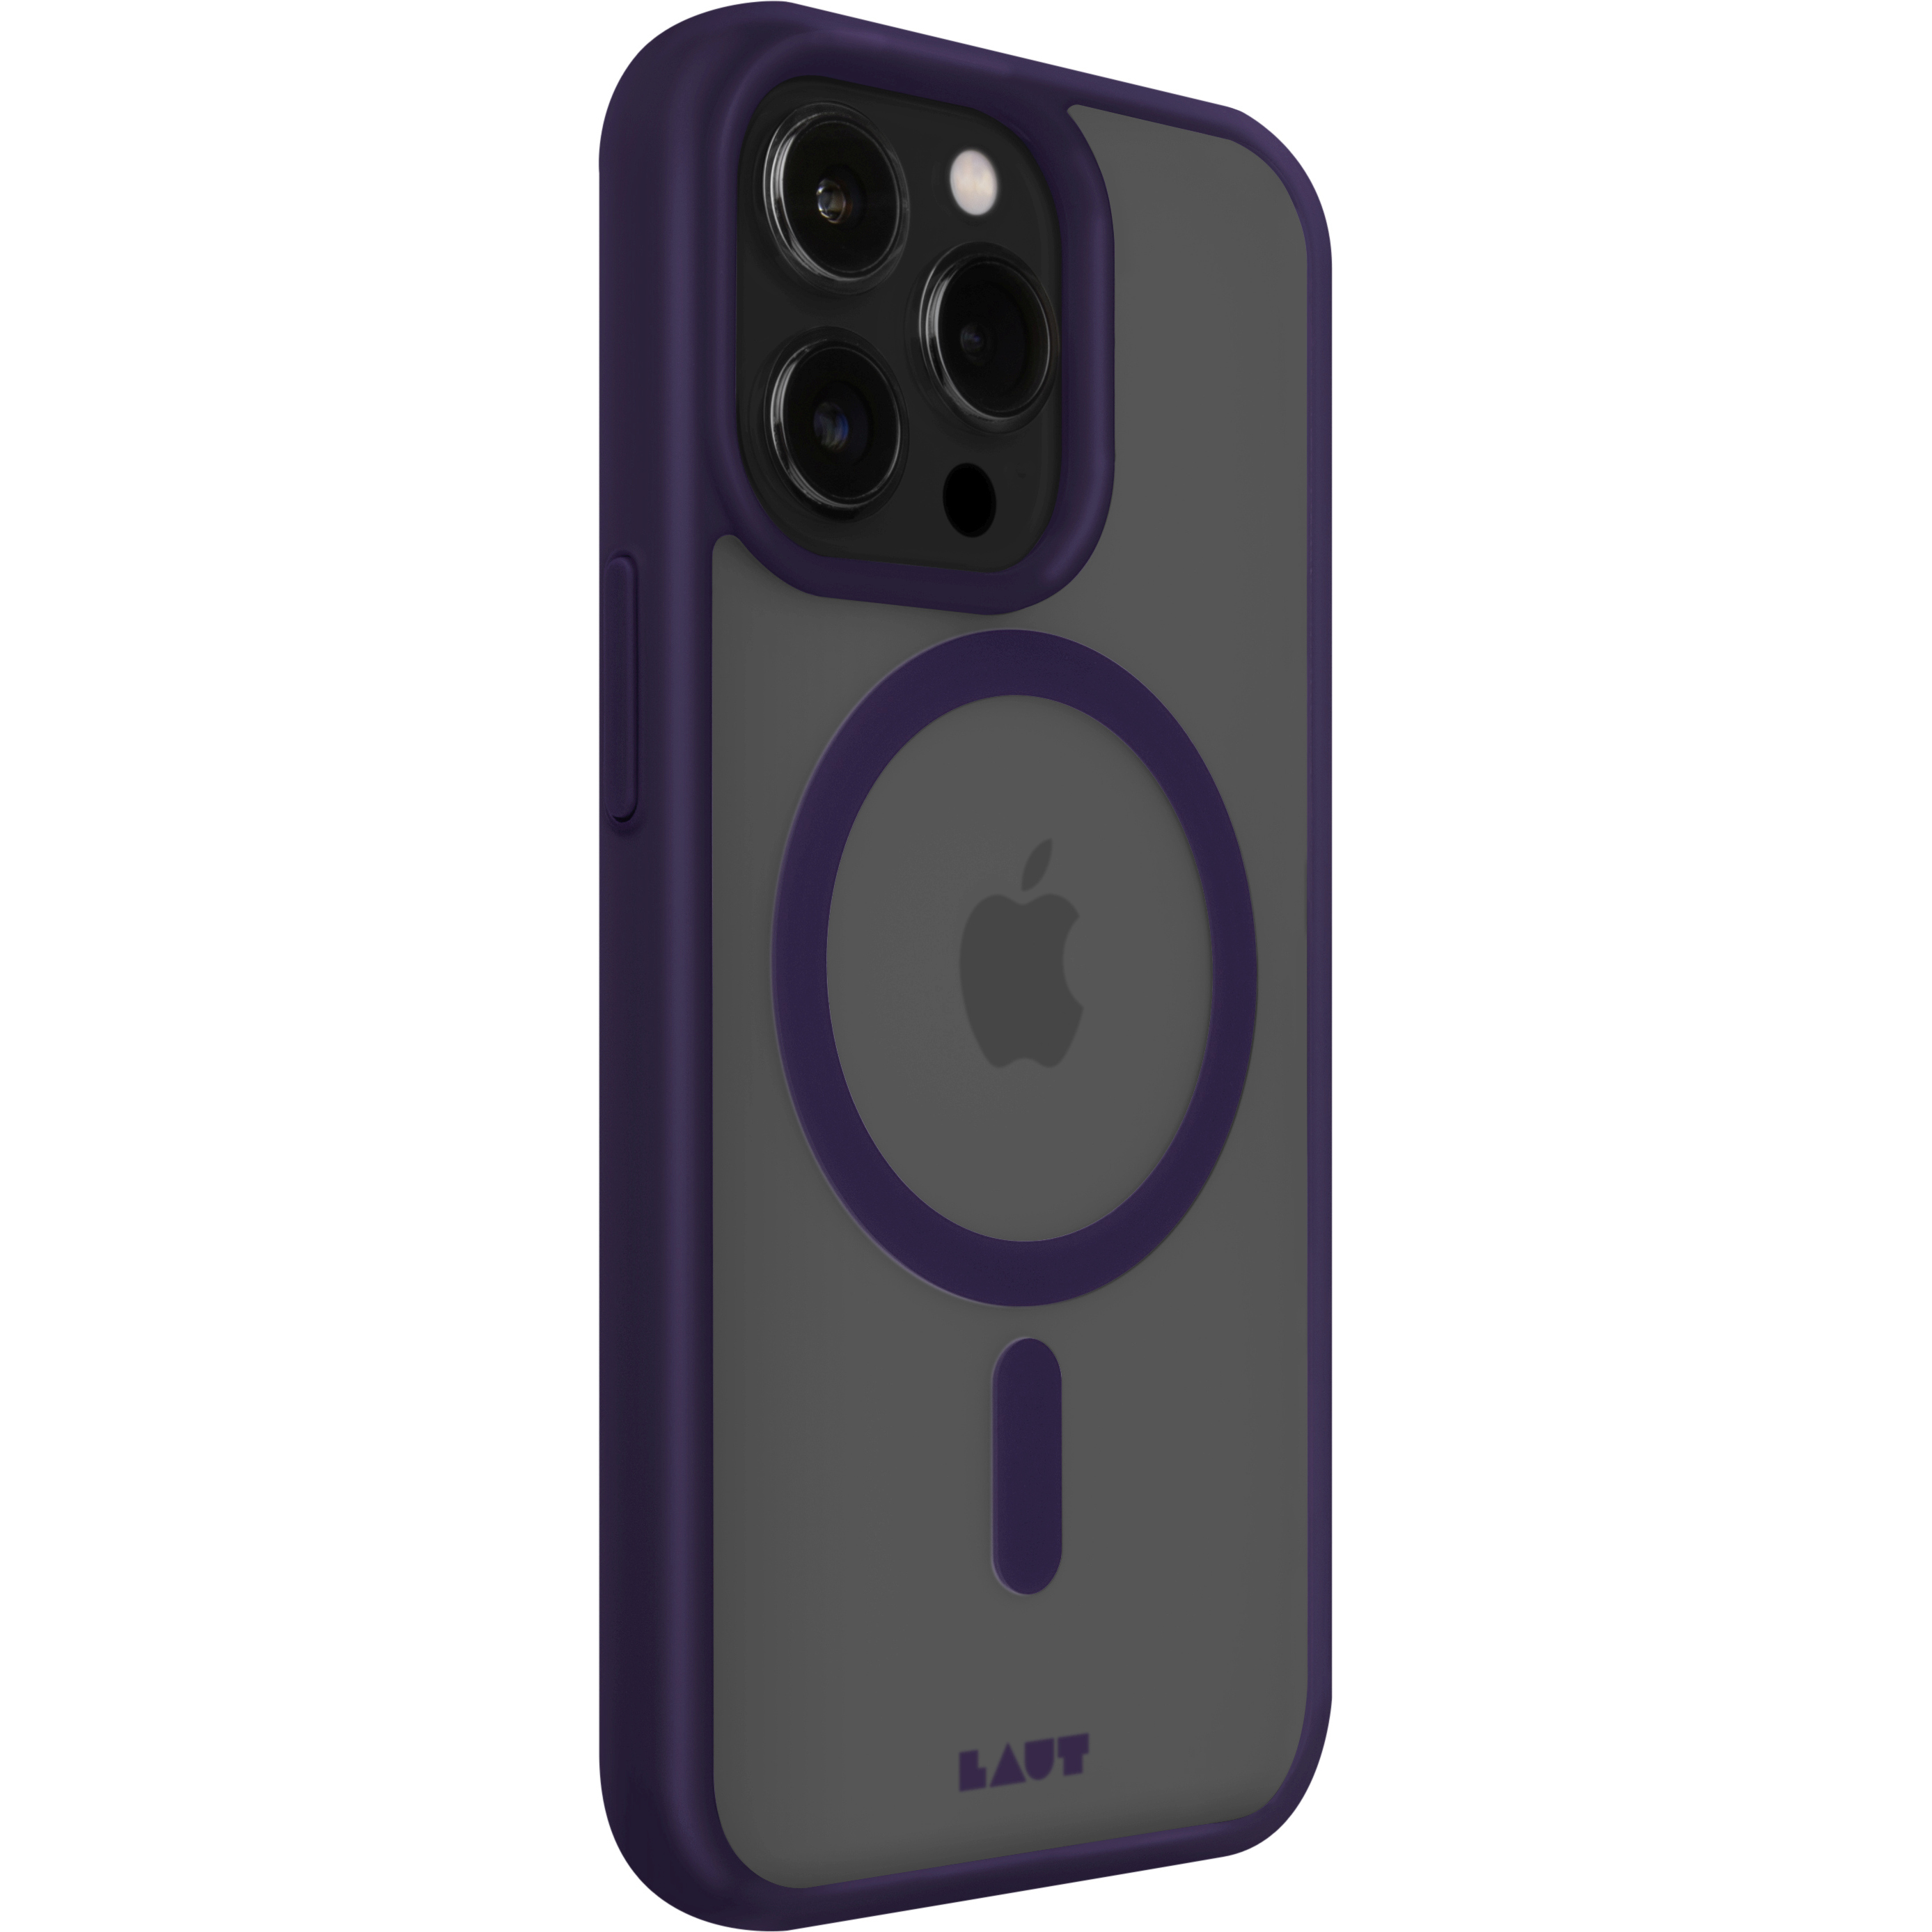 APPLE, 14 IPHONE Backcover, LAUT MAX, Protect, Huex PURPLE PRO